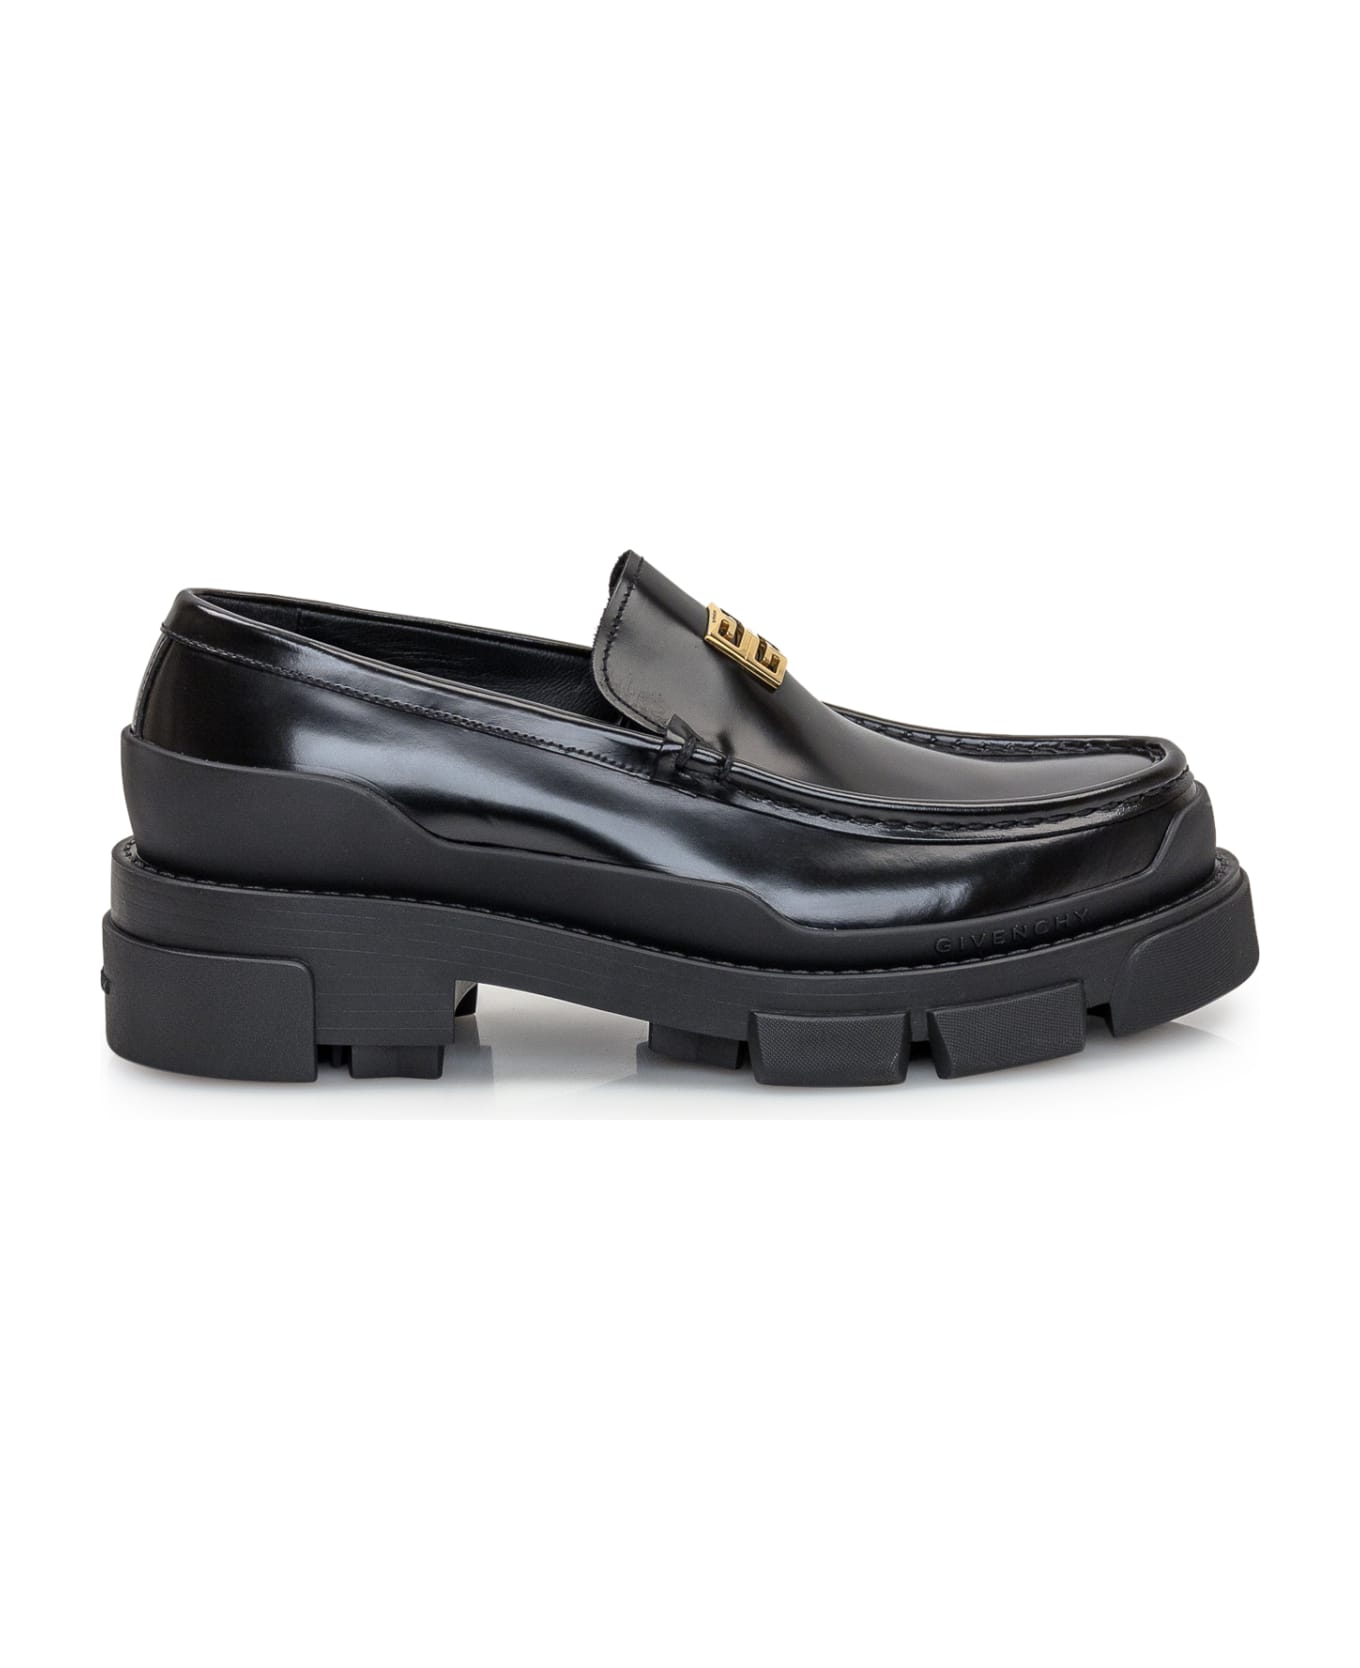 Givenchy Terra Leather Loafers - Black